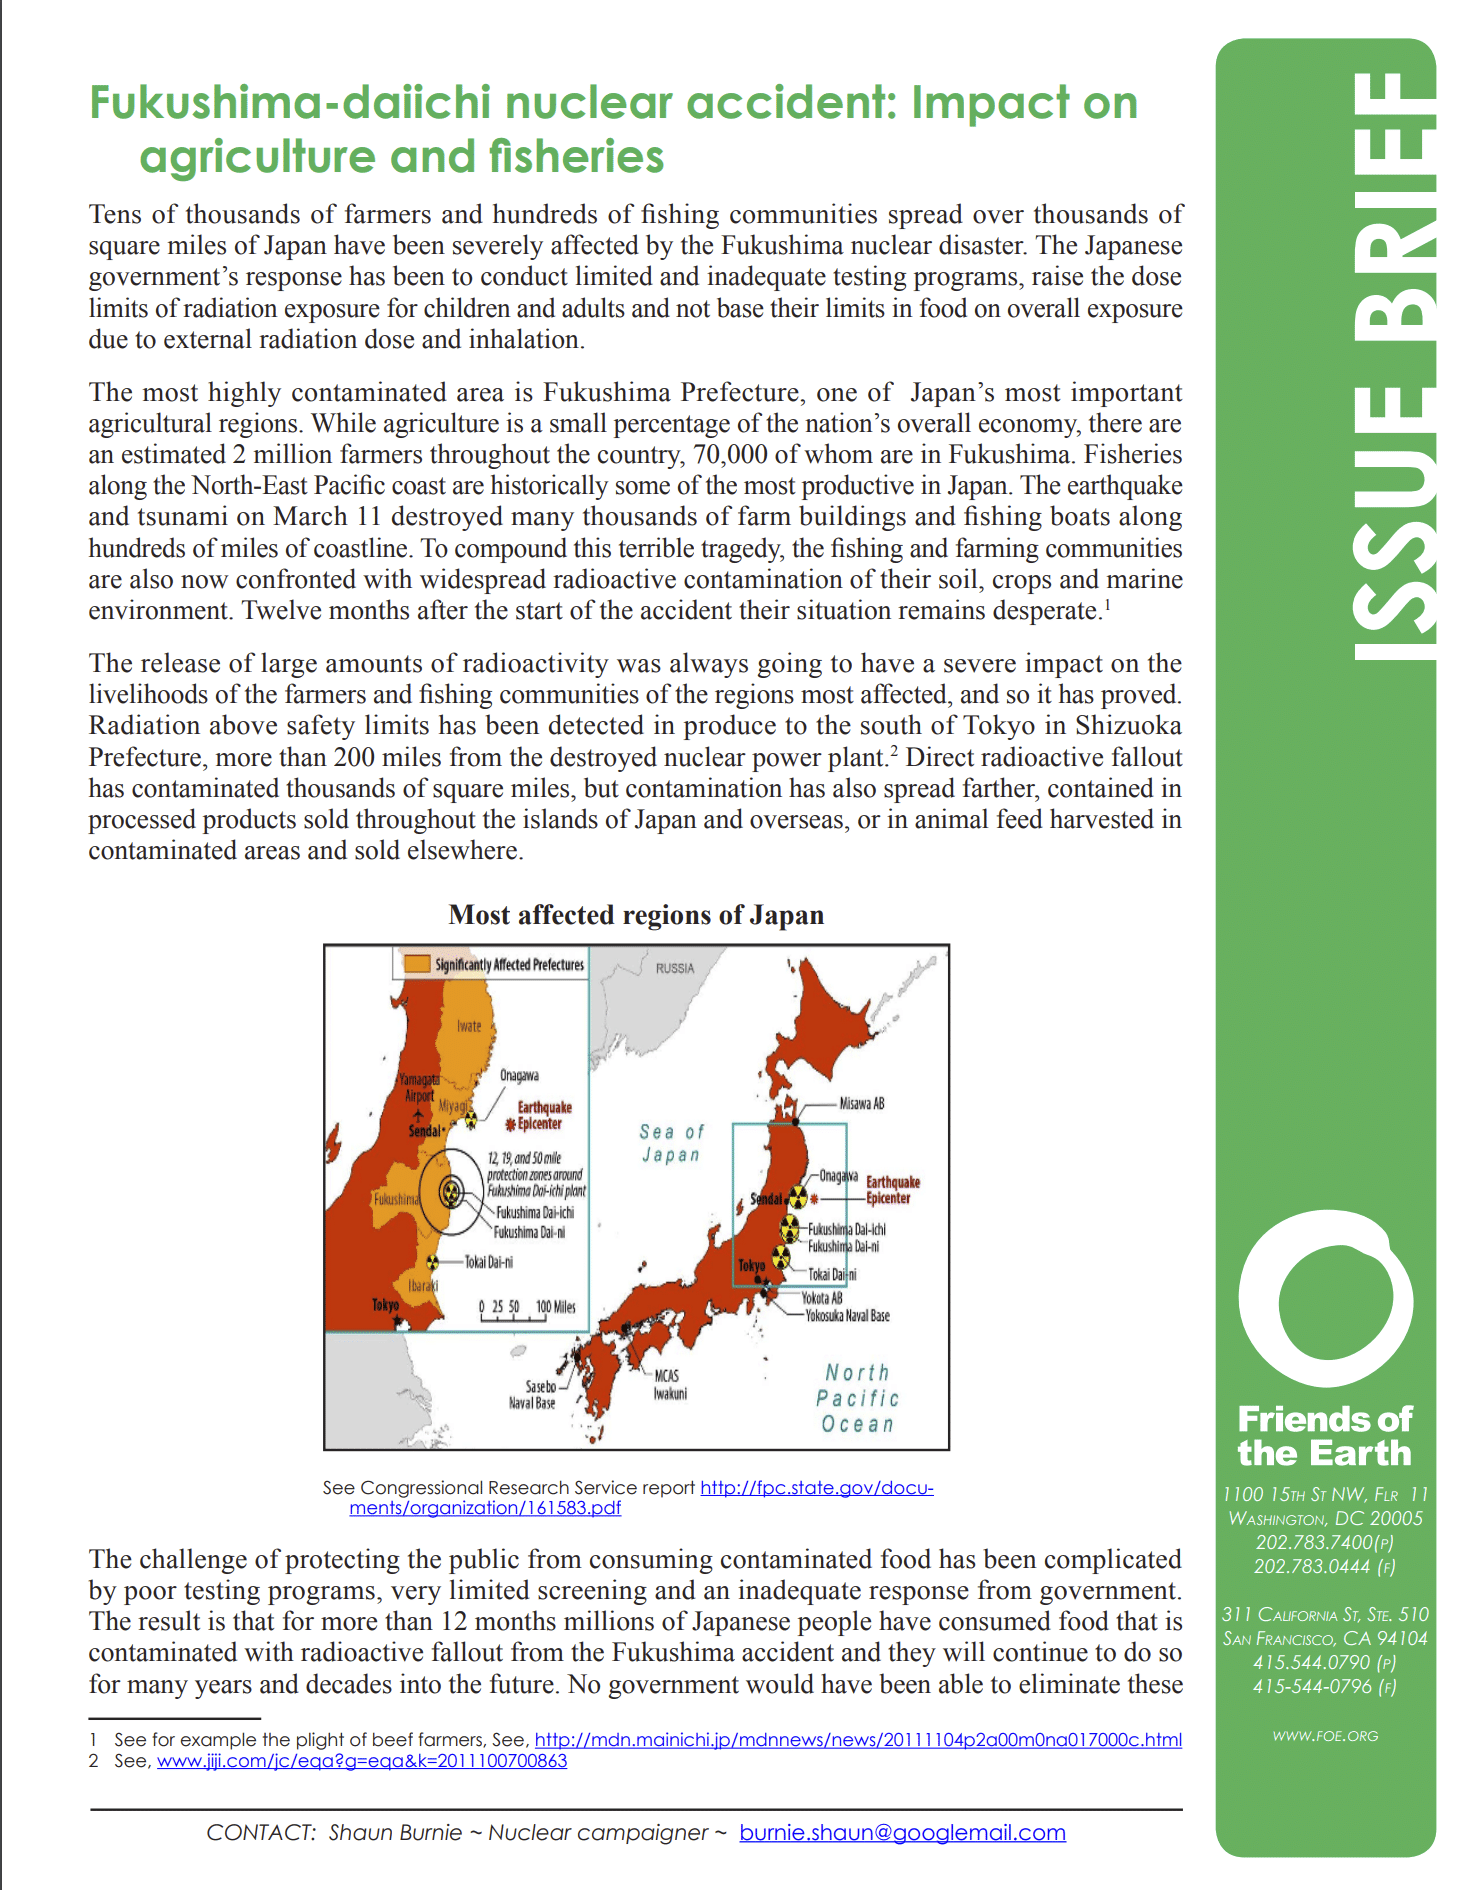 Fukushima: Impact on Agriculture and Fisheries